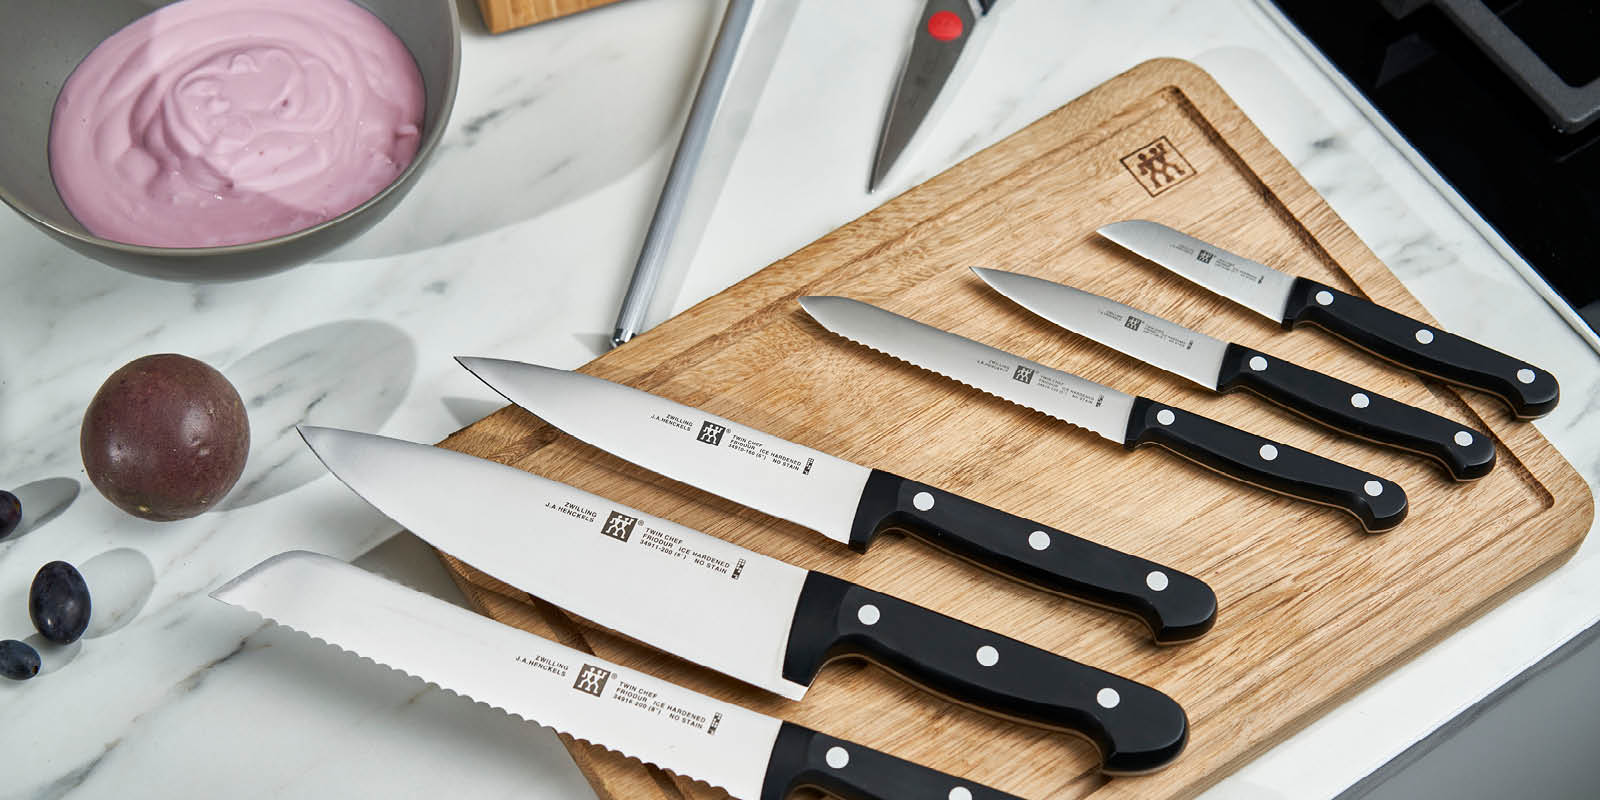 https://www.zwilling.com/on/demandware.static/-/Sites-zwilling-ca-Library/default/dwaa33f42d/images/product-content/masonry-content/zwilling/cutlery/twin-chef-2/34936-000-0_Lifestyle_Image_Series_OS_1200x600.jpg